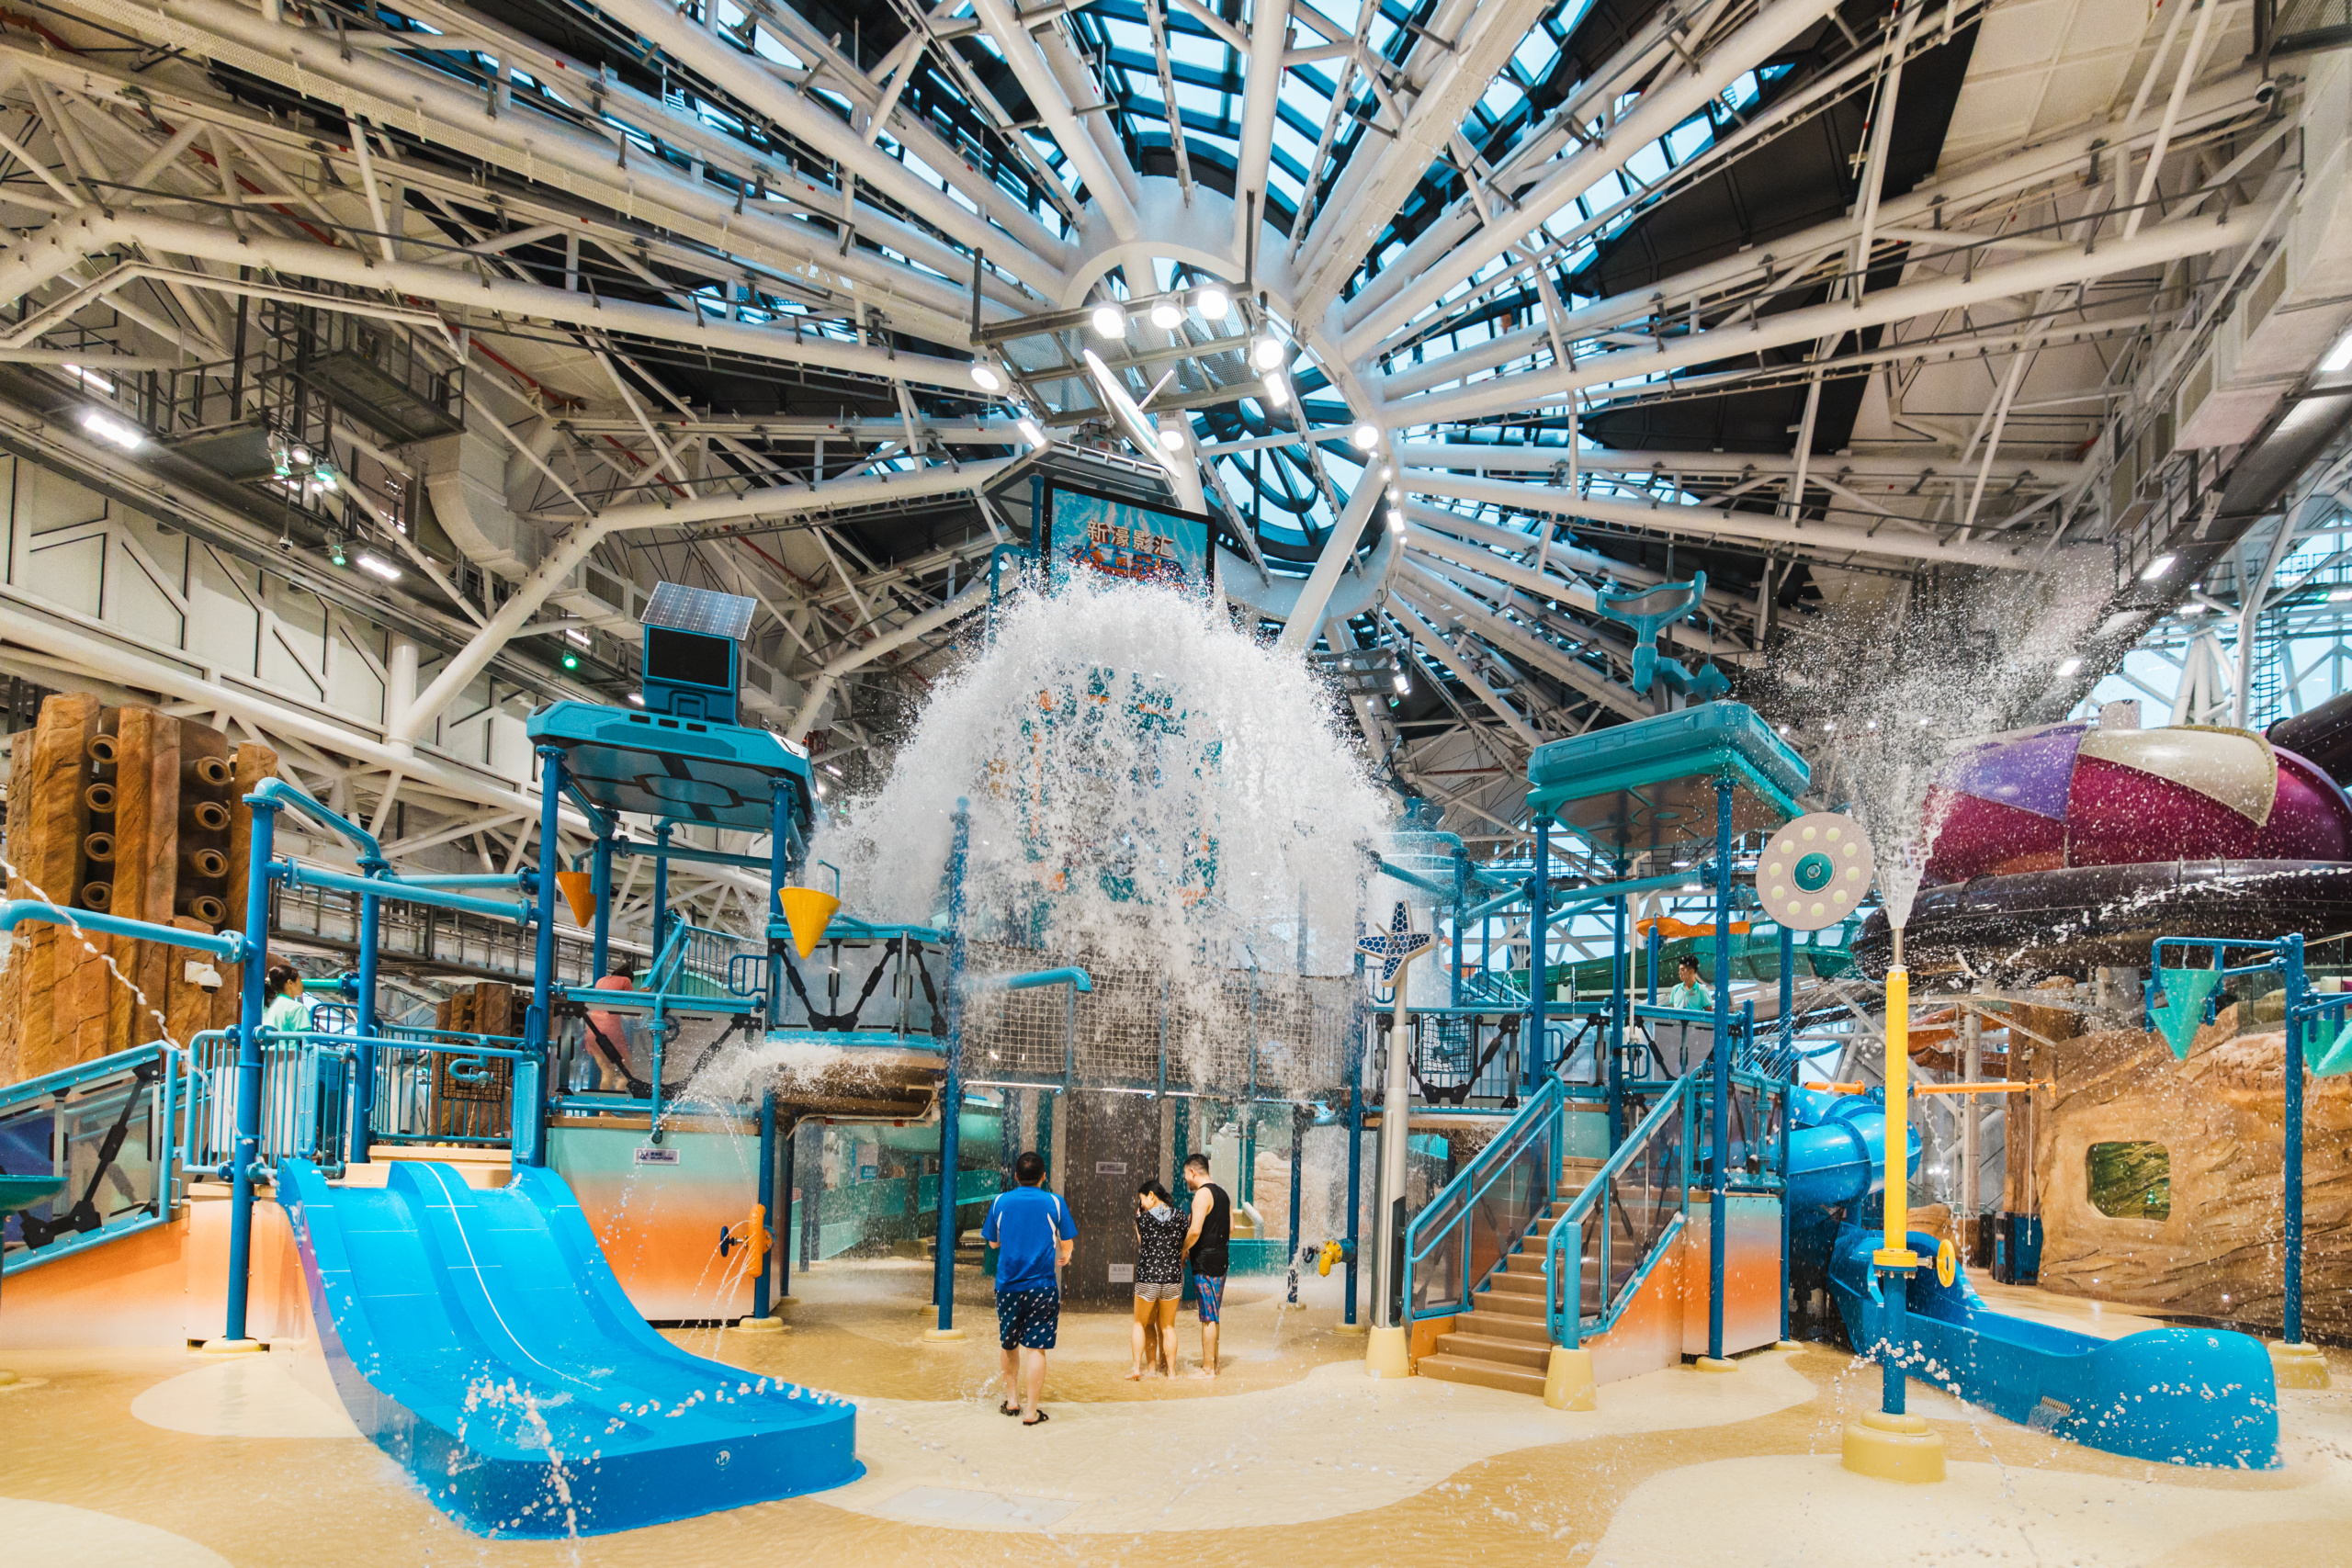 Aquatic play structure at indoor water park